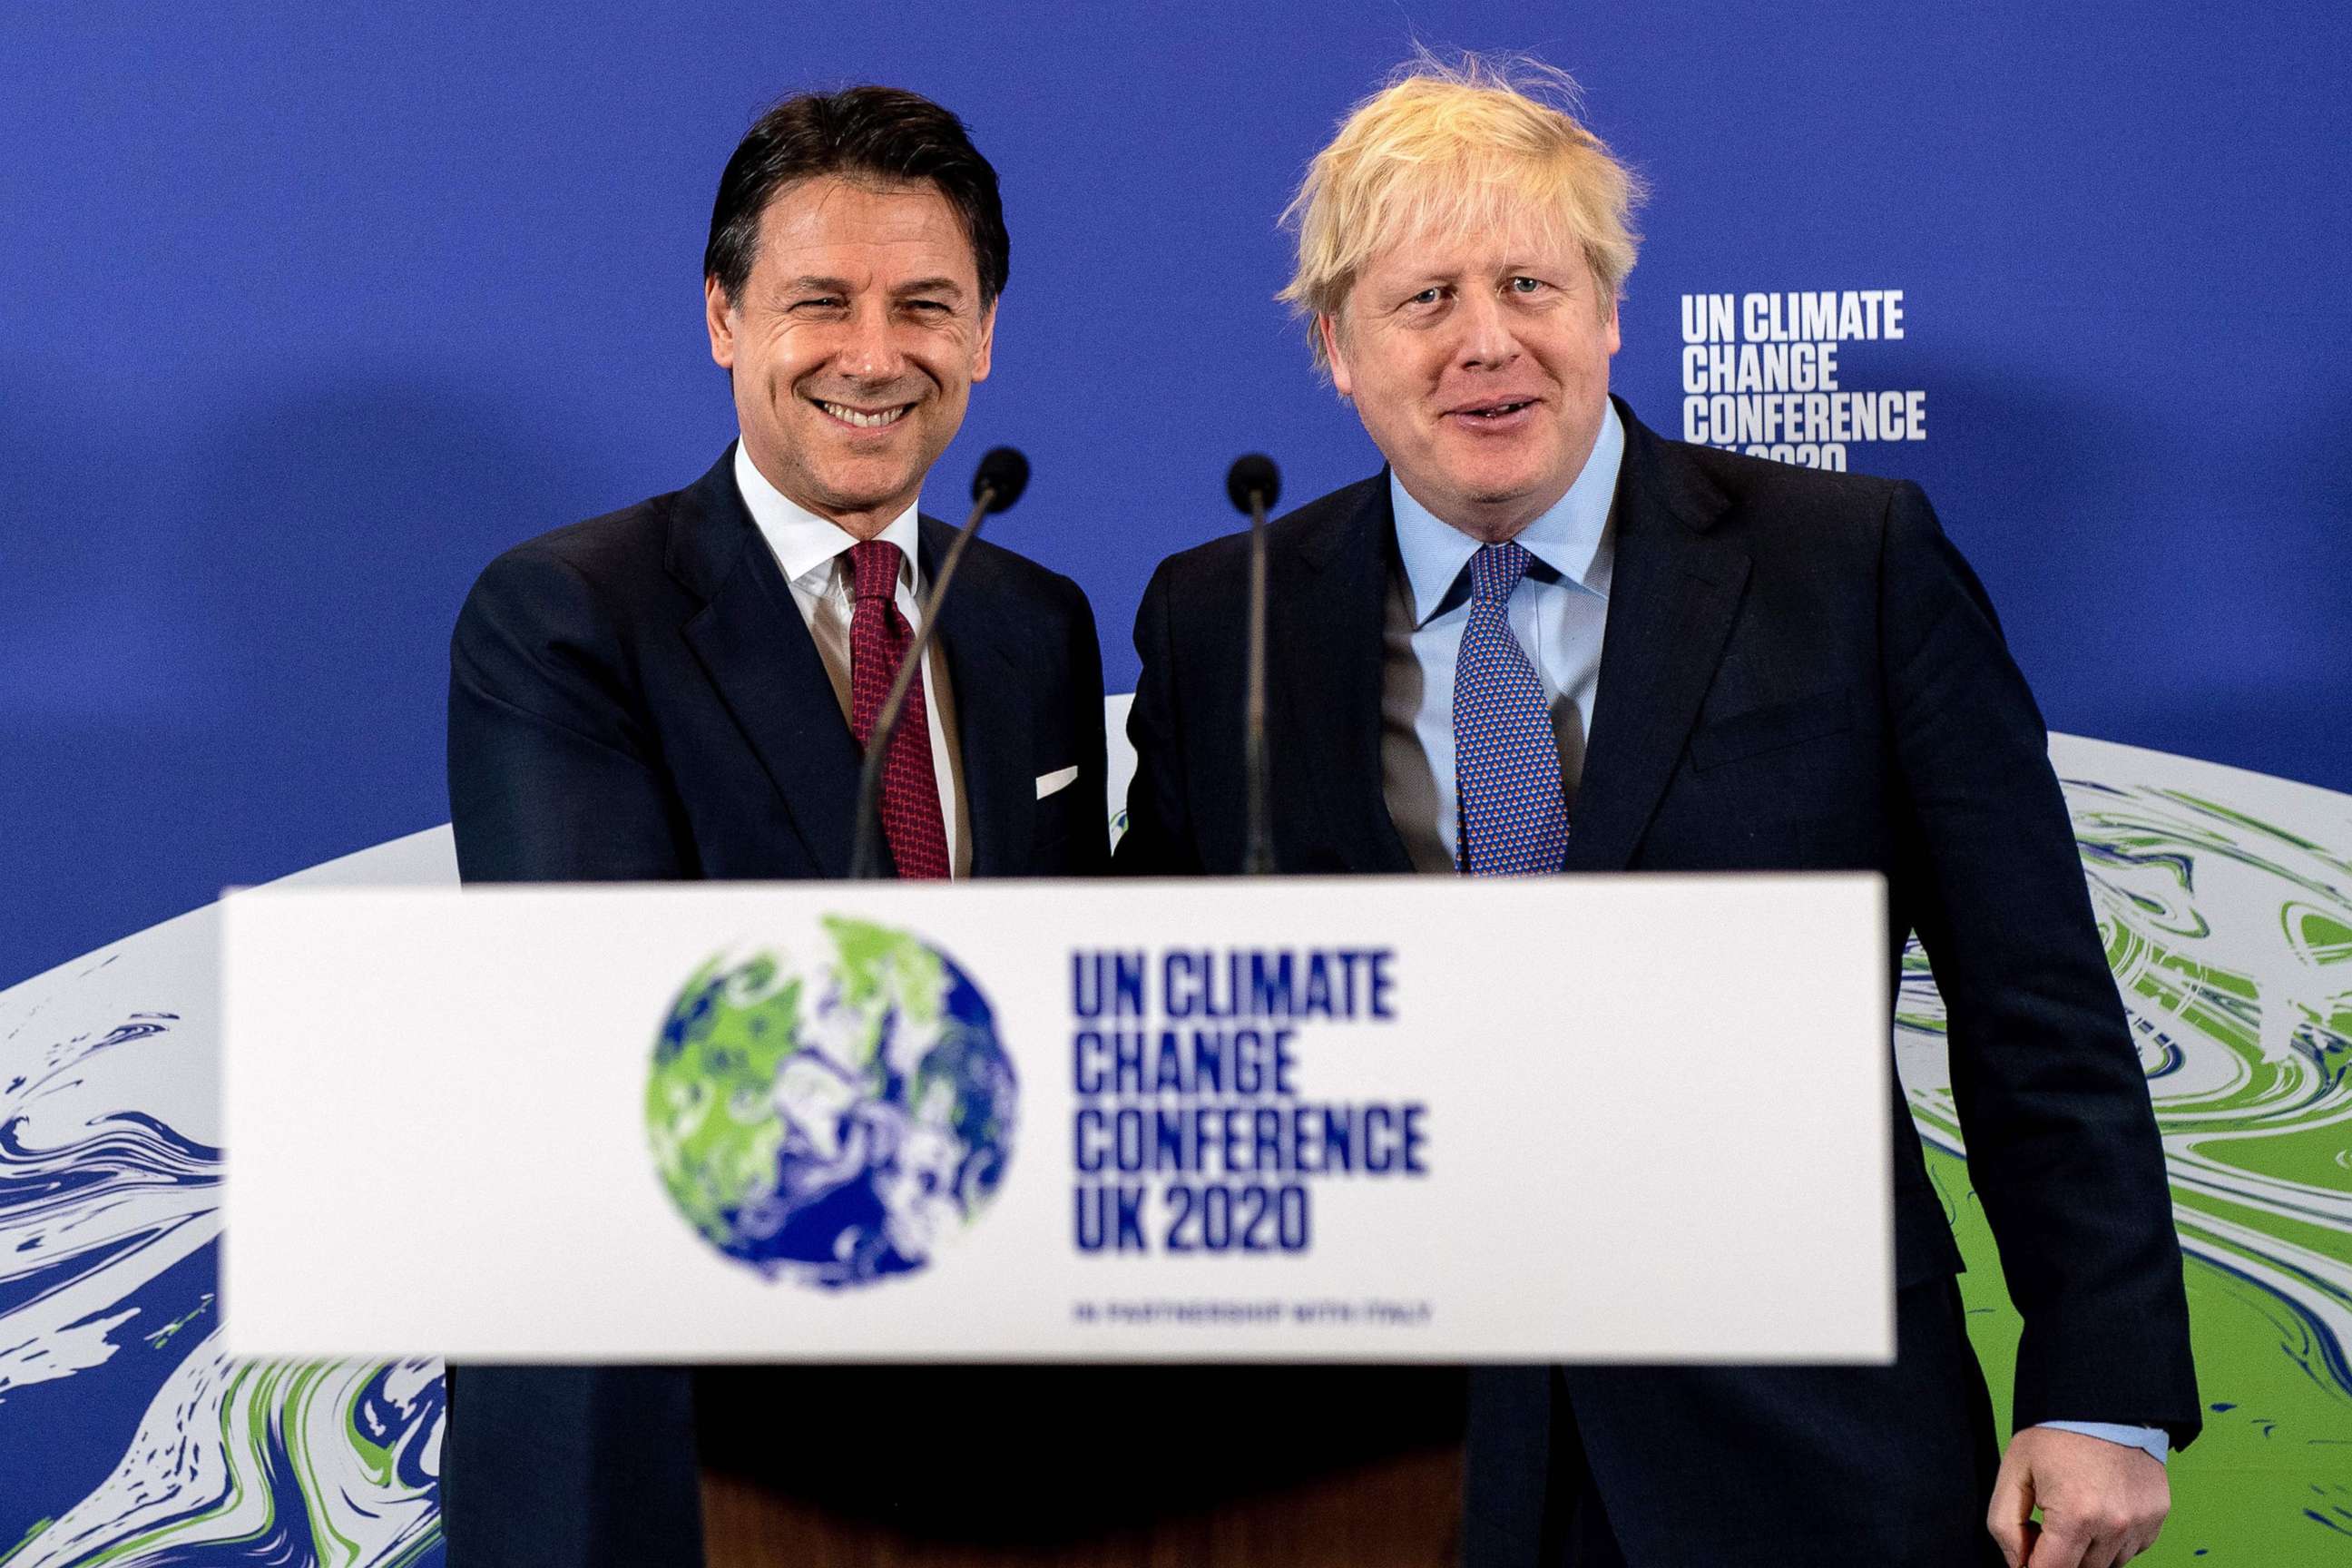 PHOTO: Britain's Prime Minister Boris Johnson and Italy's Prime Minister Giuseppe Conte shakes hands during an event to launch the United Nations' Climate Change conference, COP26, in central London on Feb. 4, 2020.